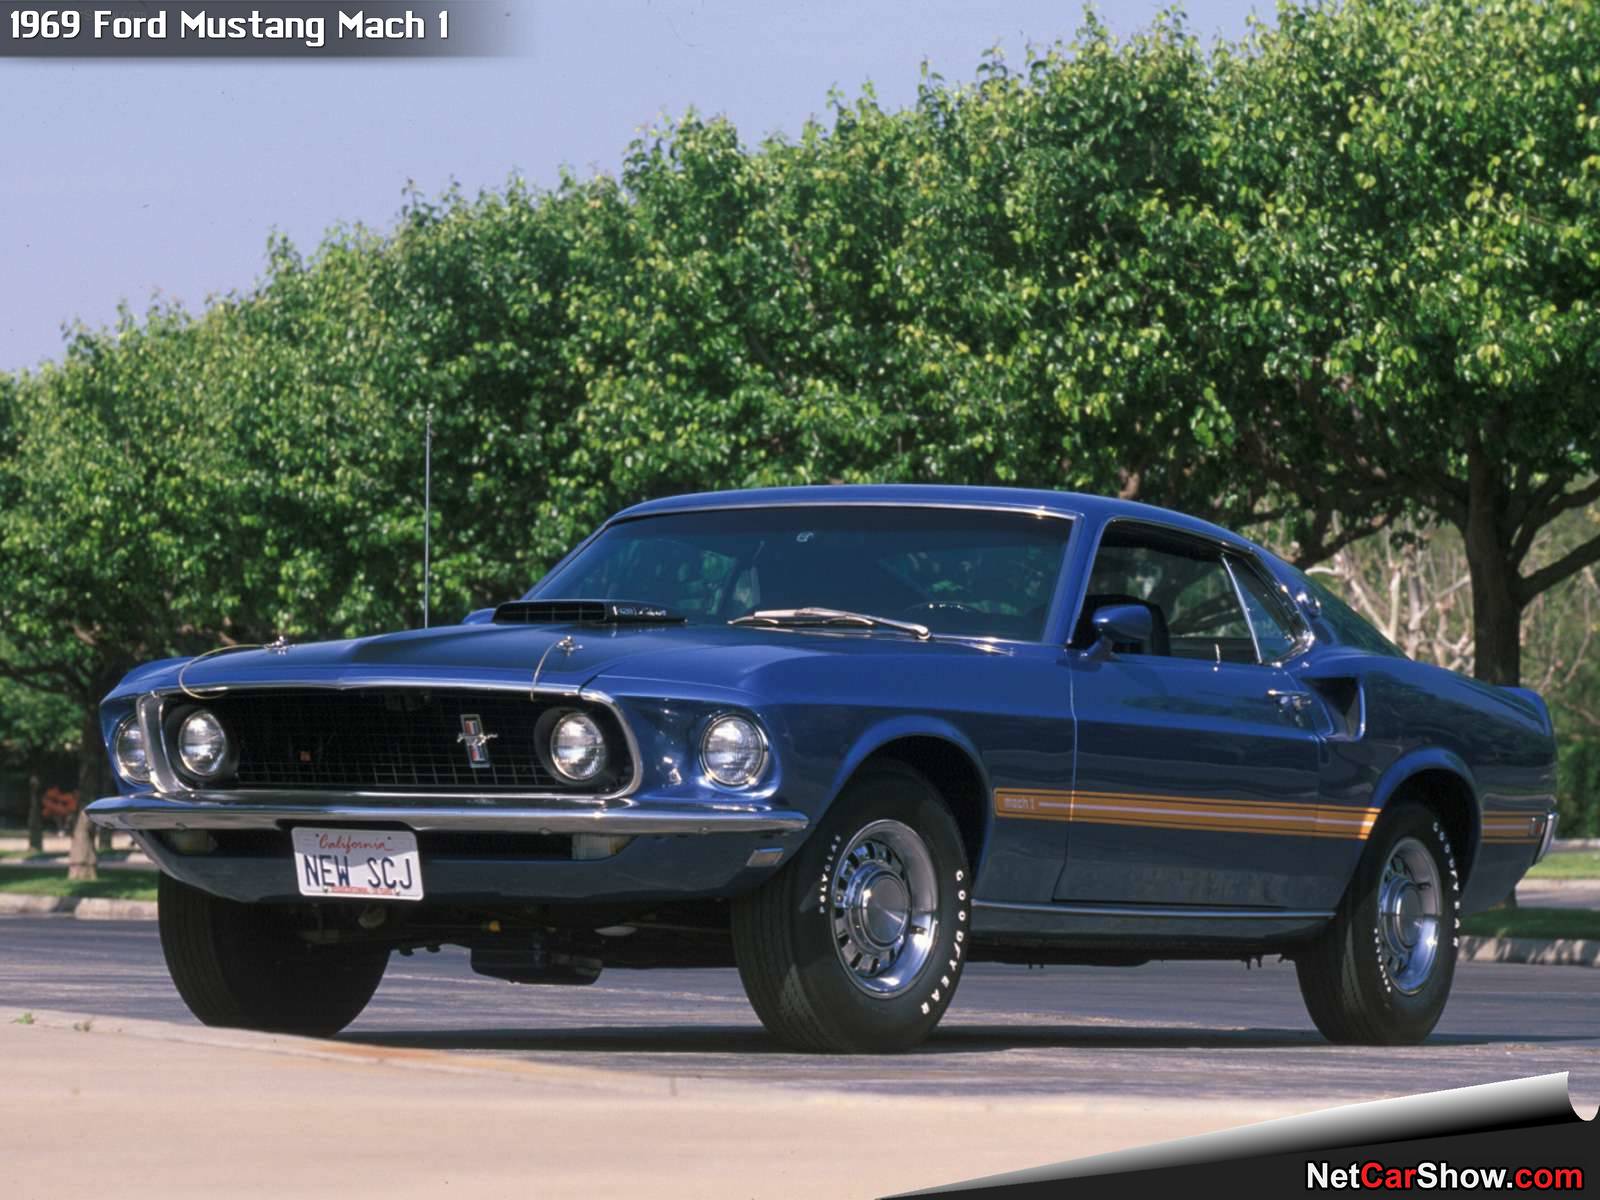 Ford Mustang Mach 1 (1969), information & specs